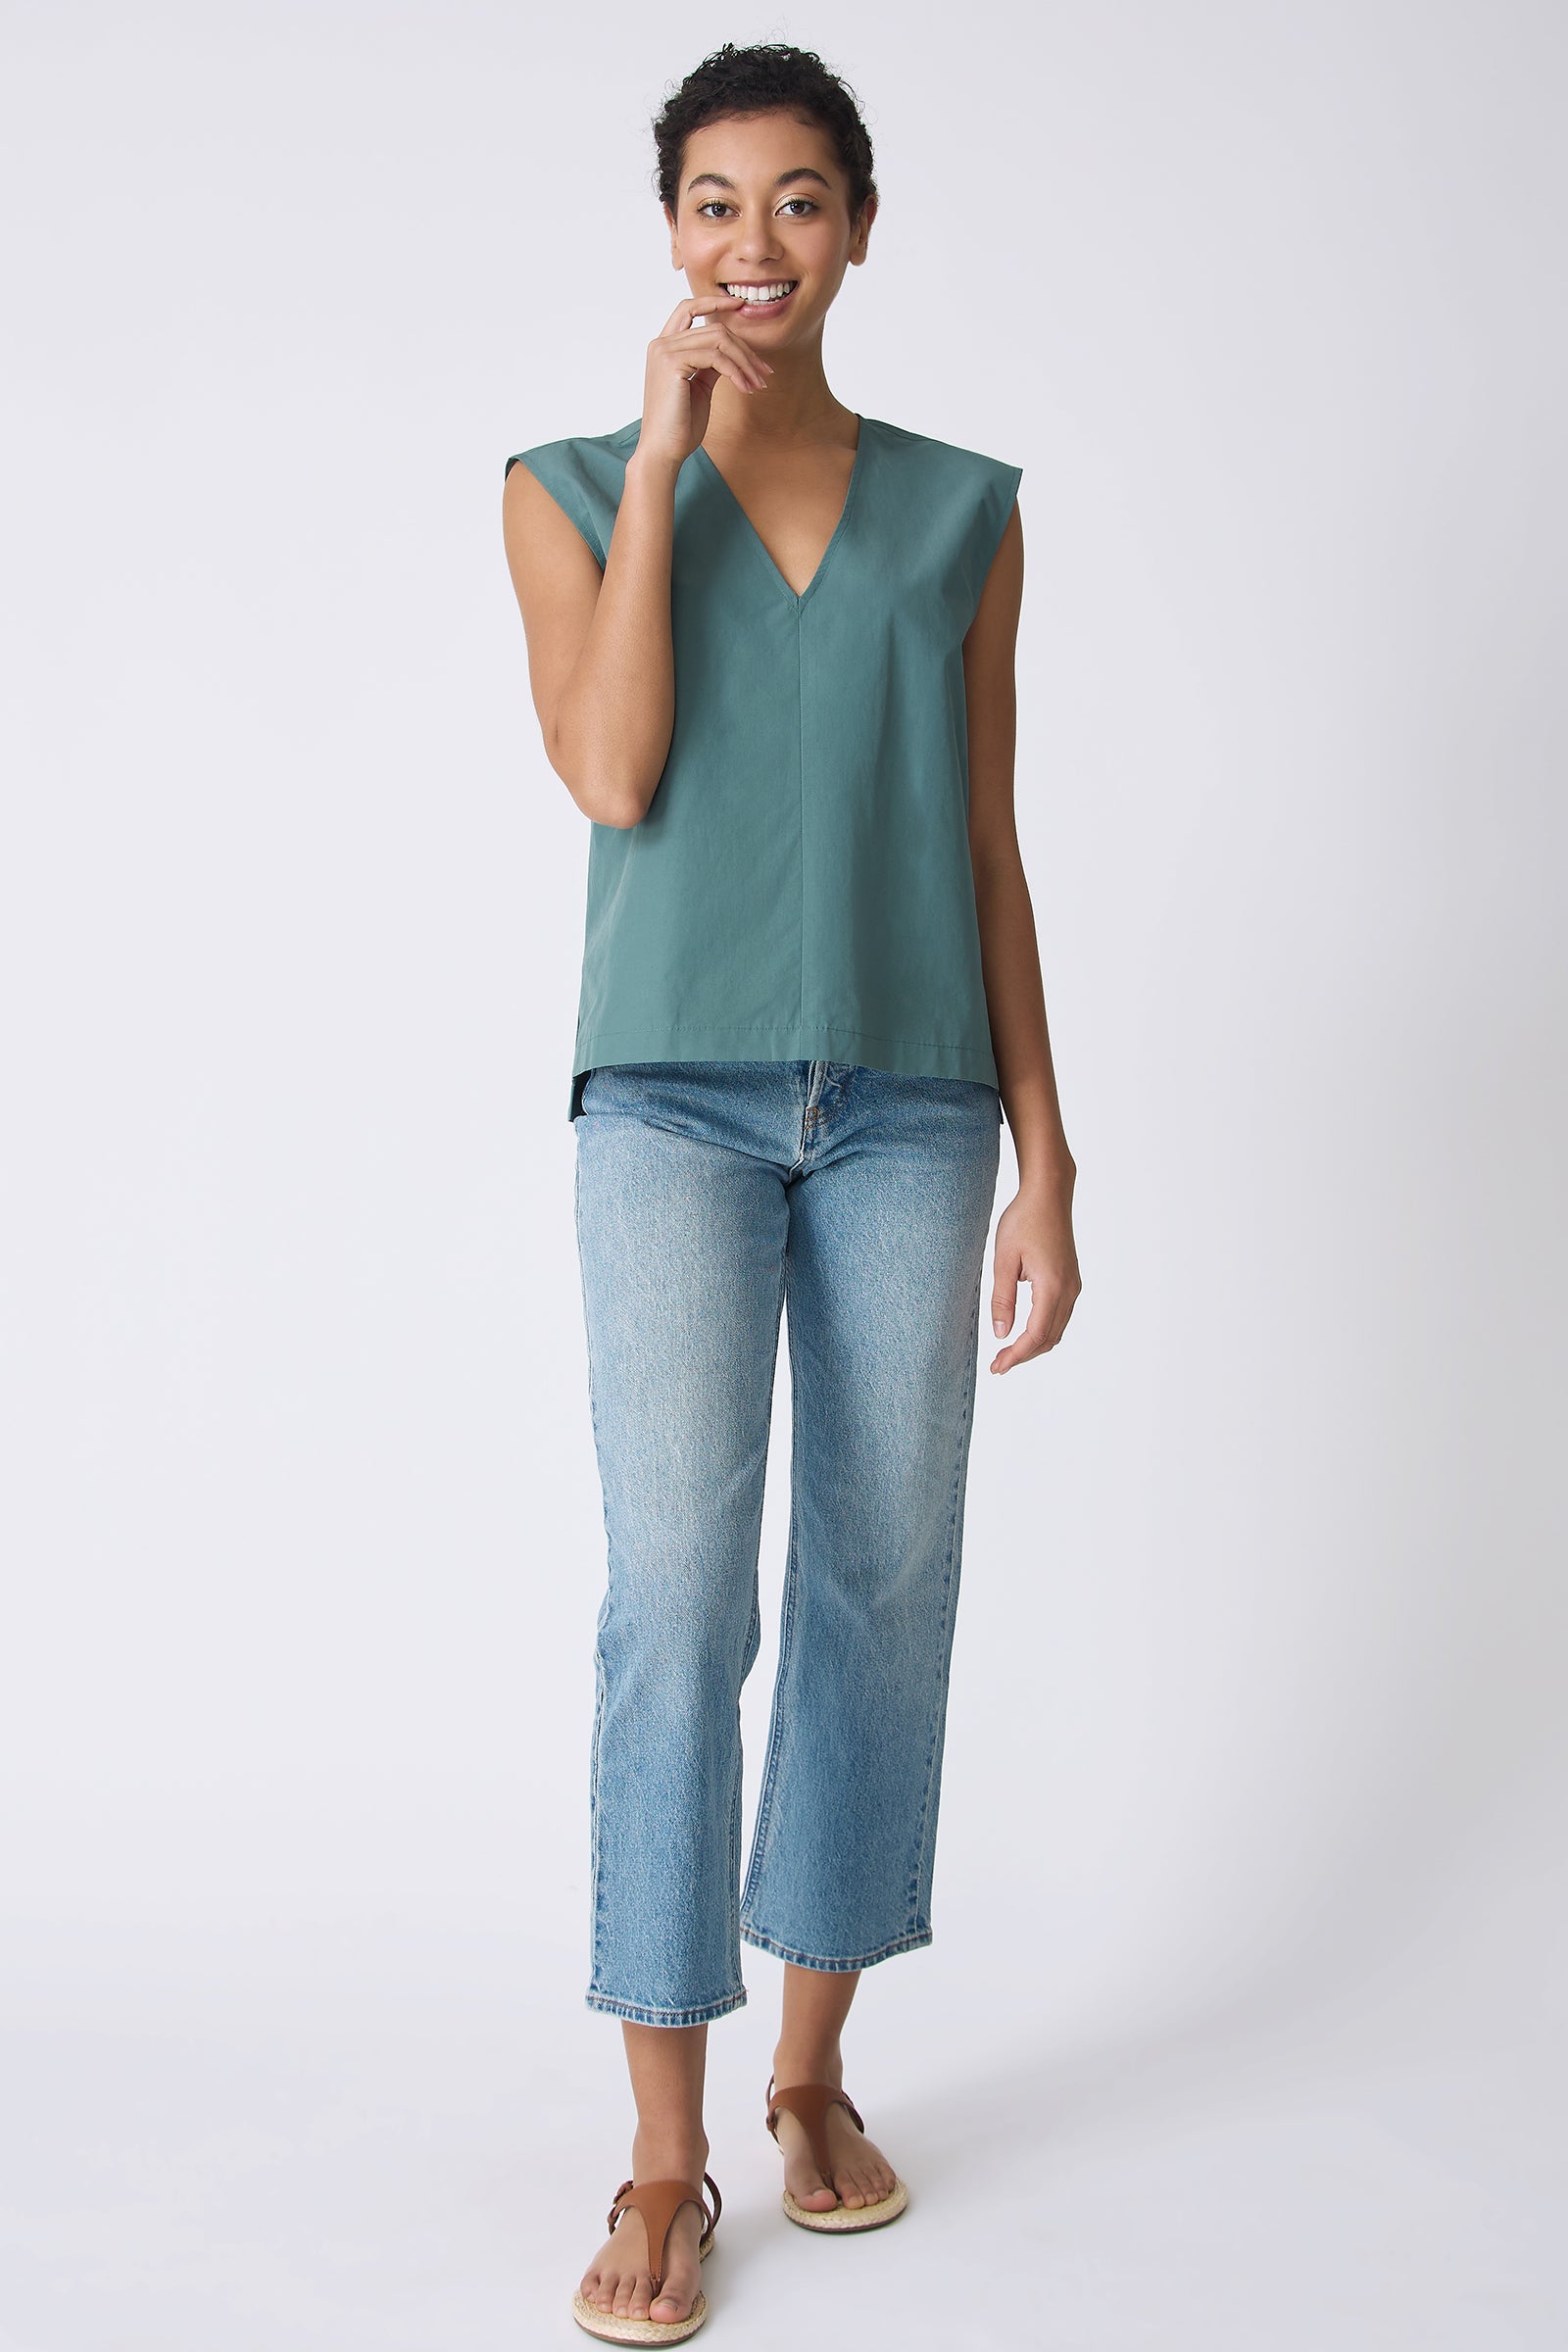 Ava V-Neck Shell Top in Sage on model smiling full front view